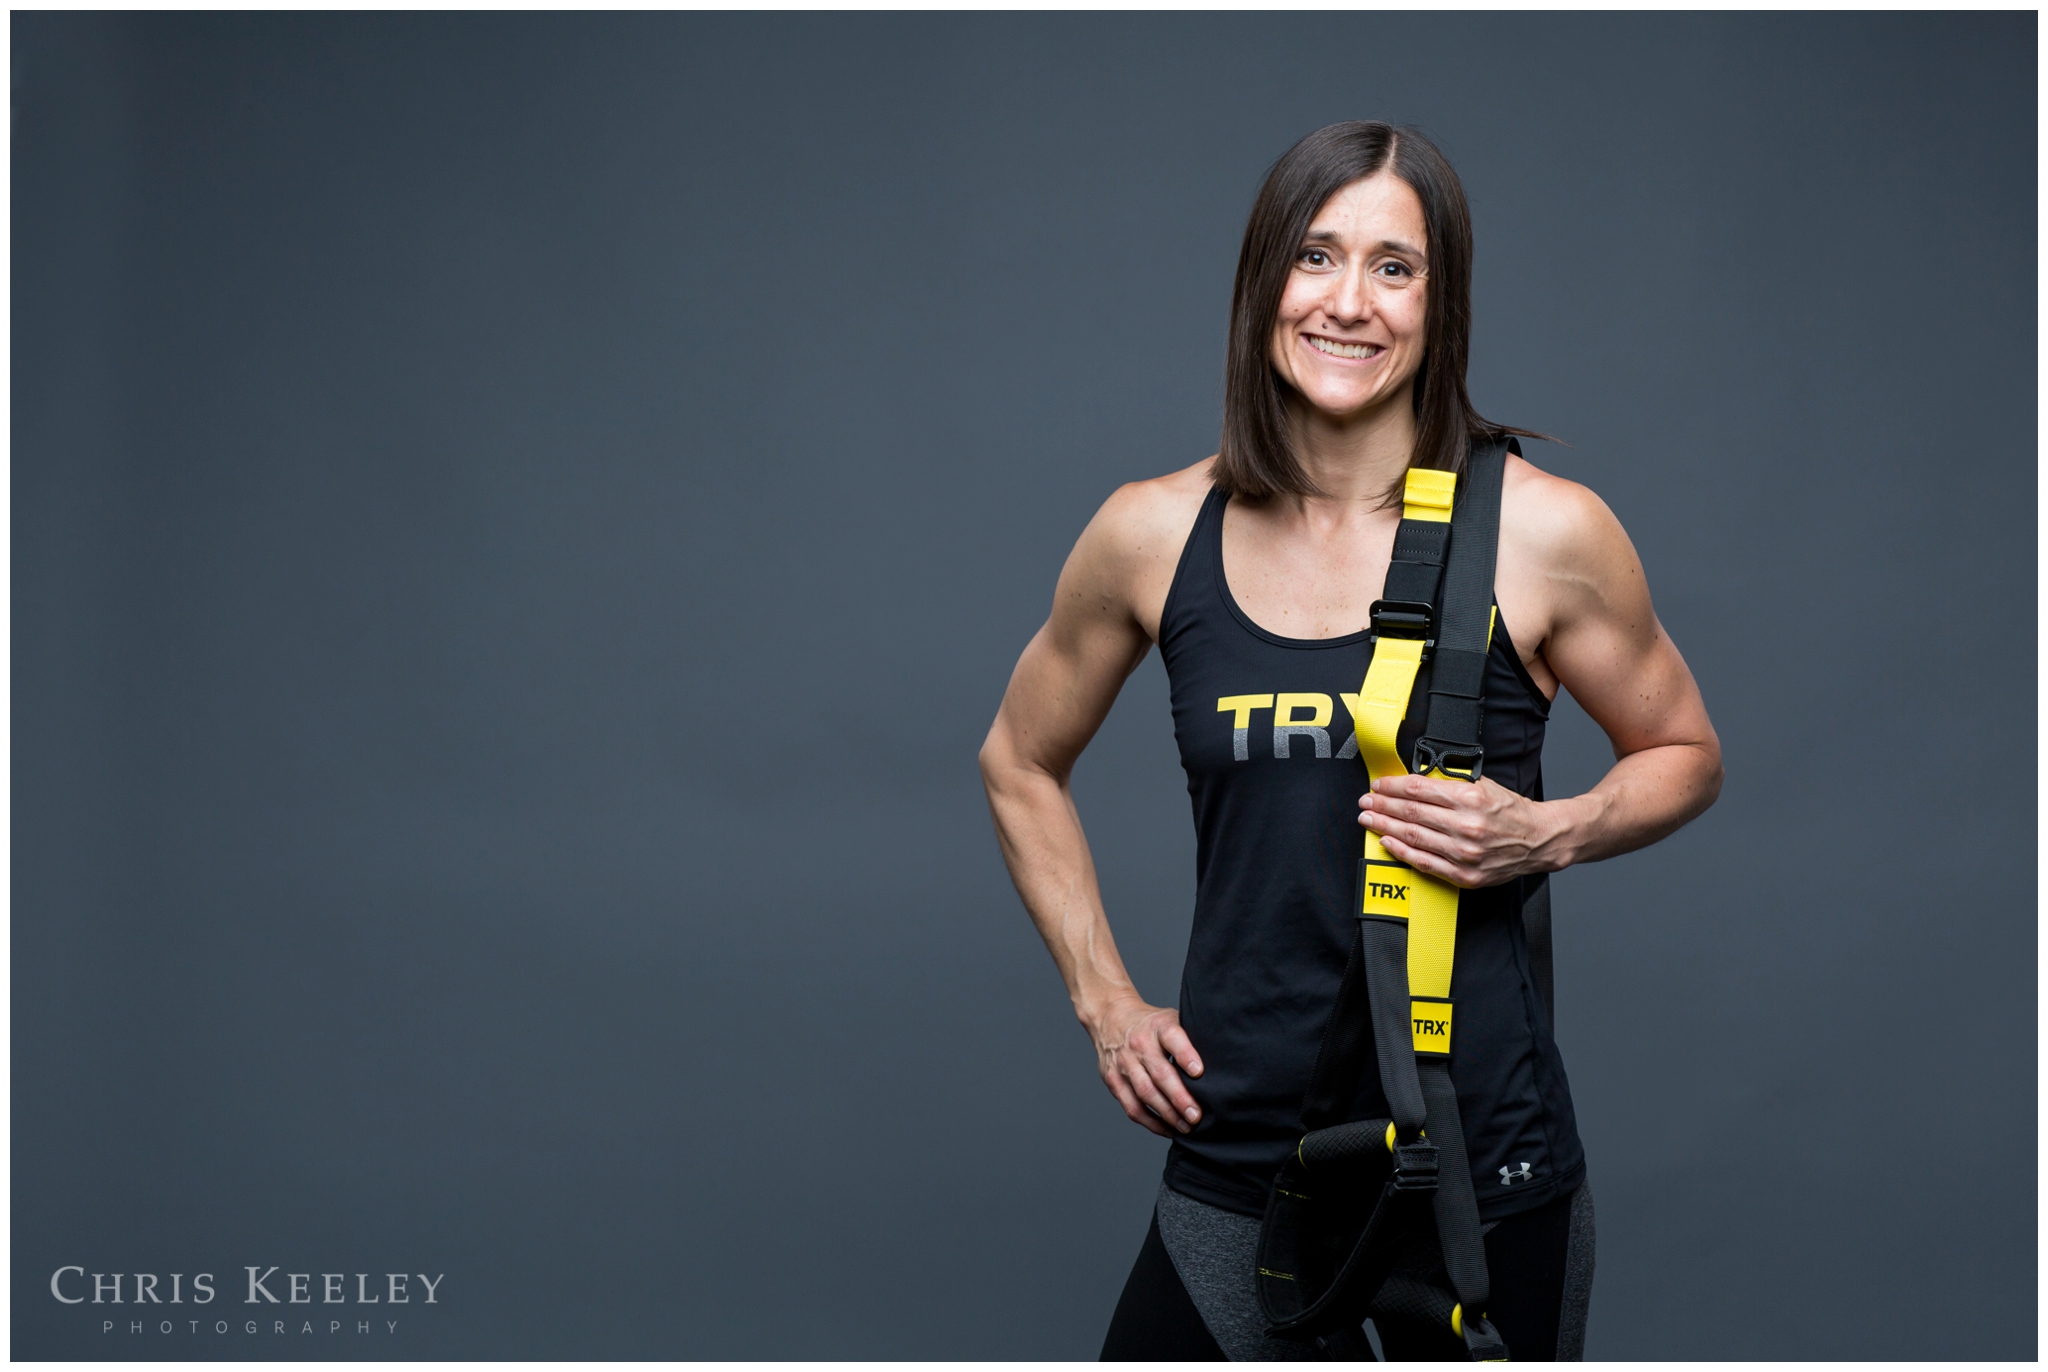 dover-new-hampshire-fitness-photography-trx-personal-trainer-photoshoot-12.jpg